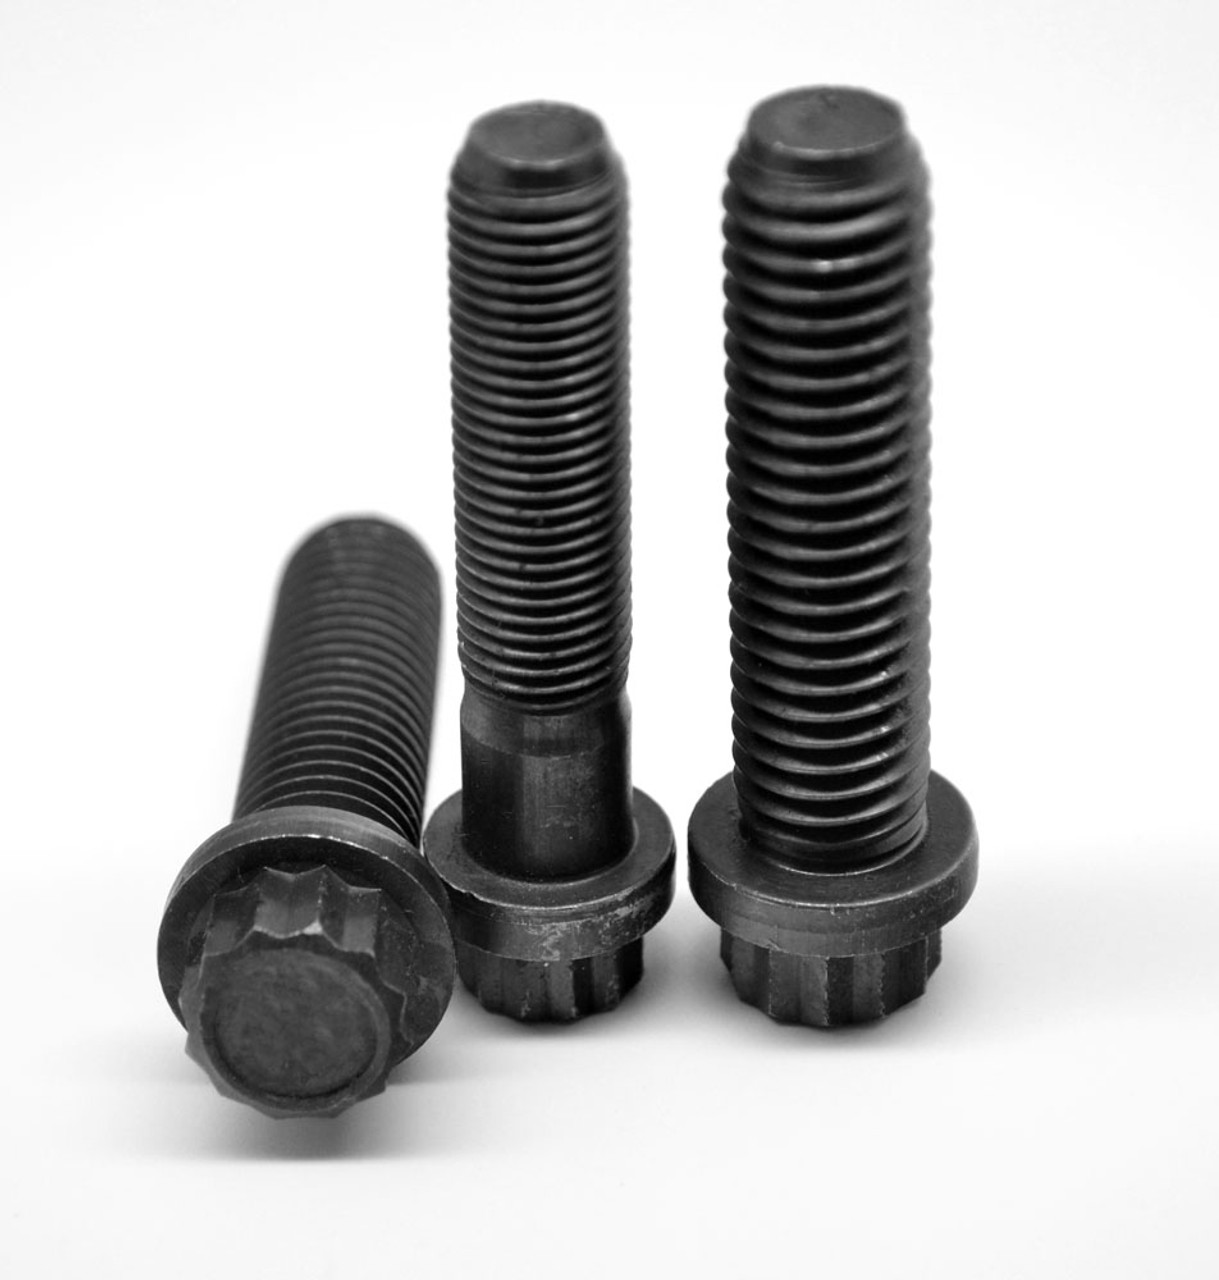 1/4-20 x 7/8 Coarse Thread 12-Point Flange Screw Alloy Steel Thermal Black Oxide